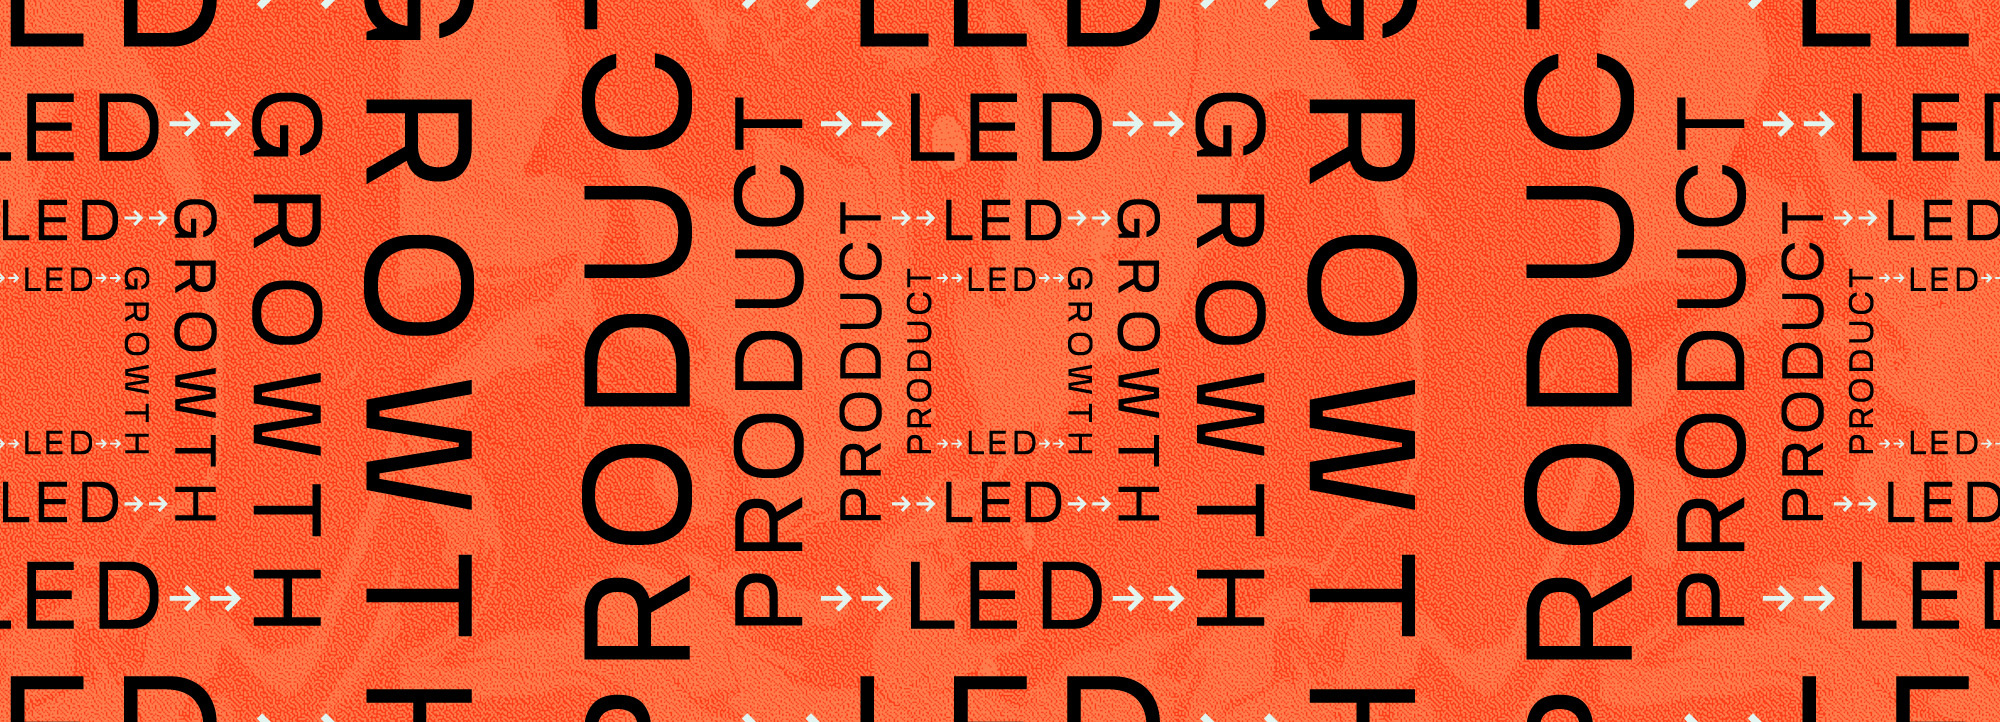 Product-Led Growth